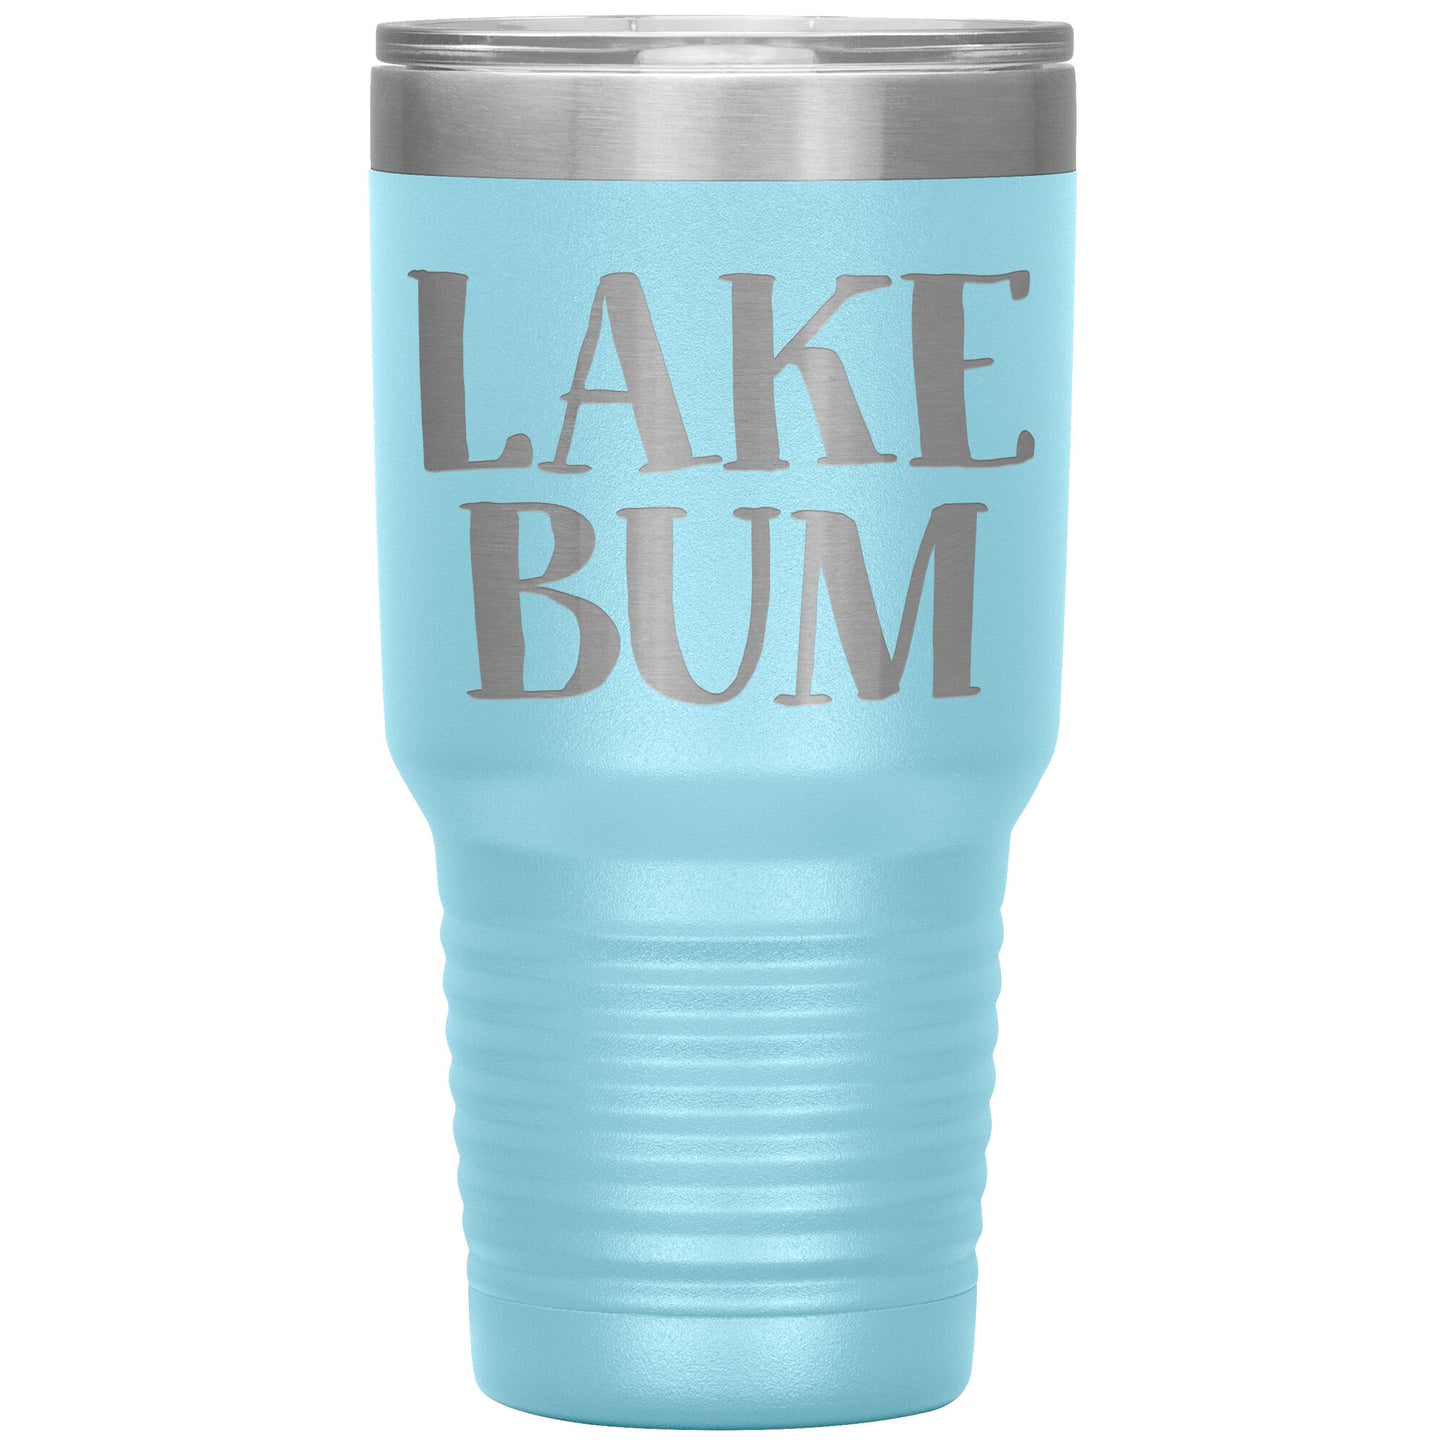 Lake Bum Drink Tumbler - Funny Insulated Cup with Lid